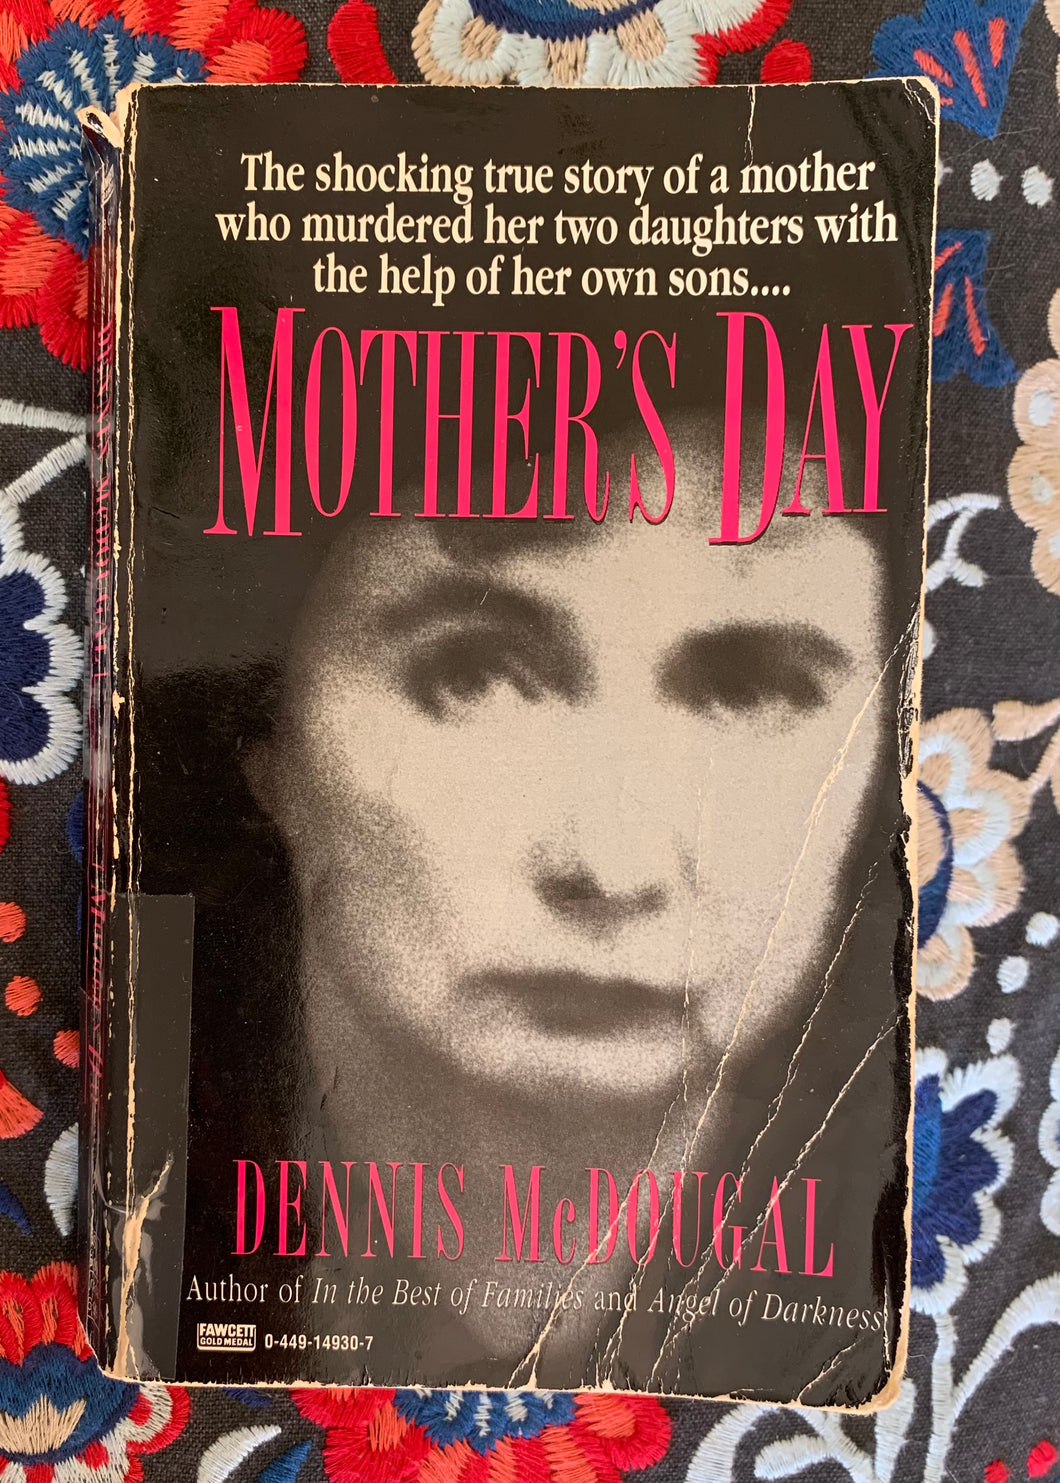 Mother's Day: The Shocking True Story of a Mother Who Murdered Her Two Daughters With the Help of Her Own Sons...